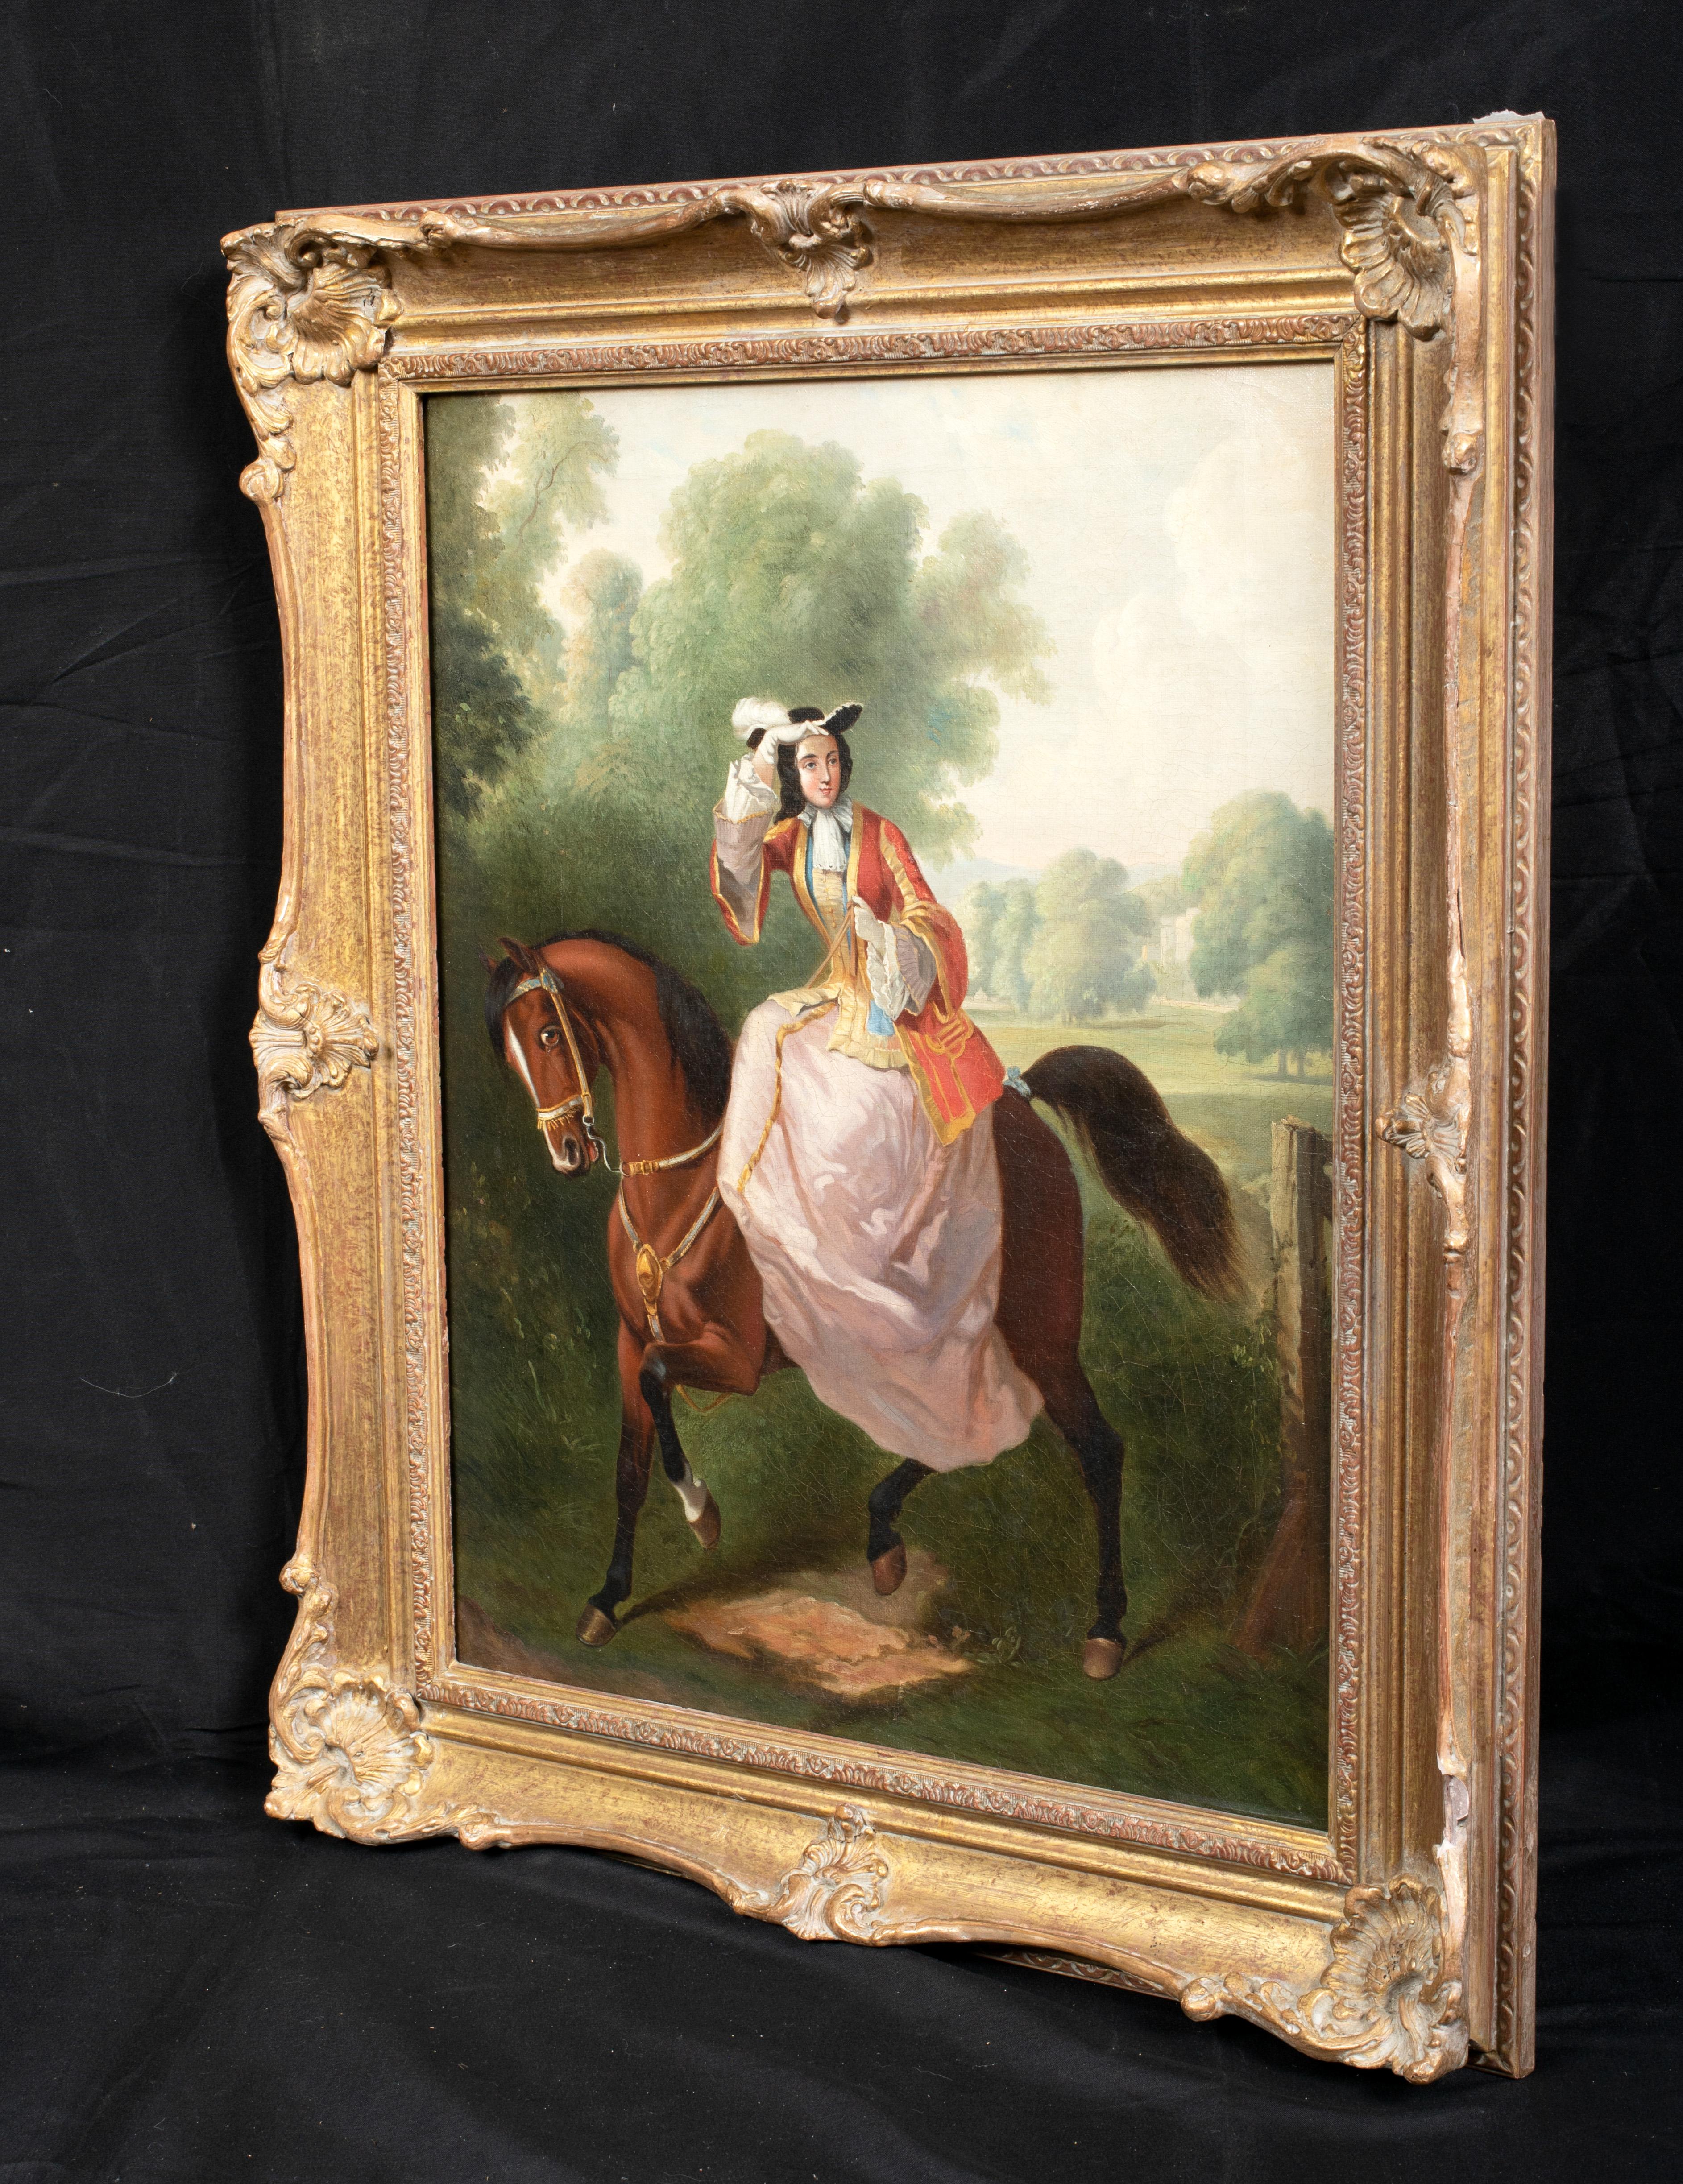 Portrait Of A Lady Riding Sidesaddle, 19th Century

English School

Fine 19th Century English School Portrait of a Lady riding sidesaddle. oil on canvas. Good quality and condition of the young lady searching the woodland on horseback wearing a